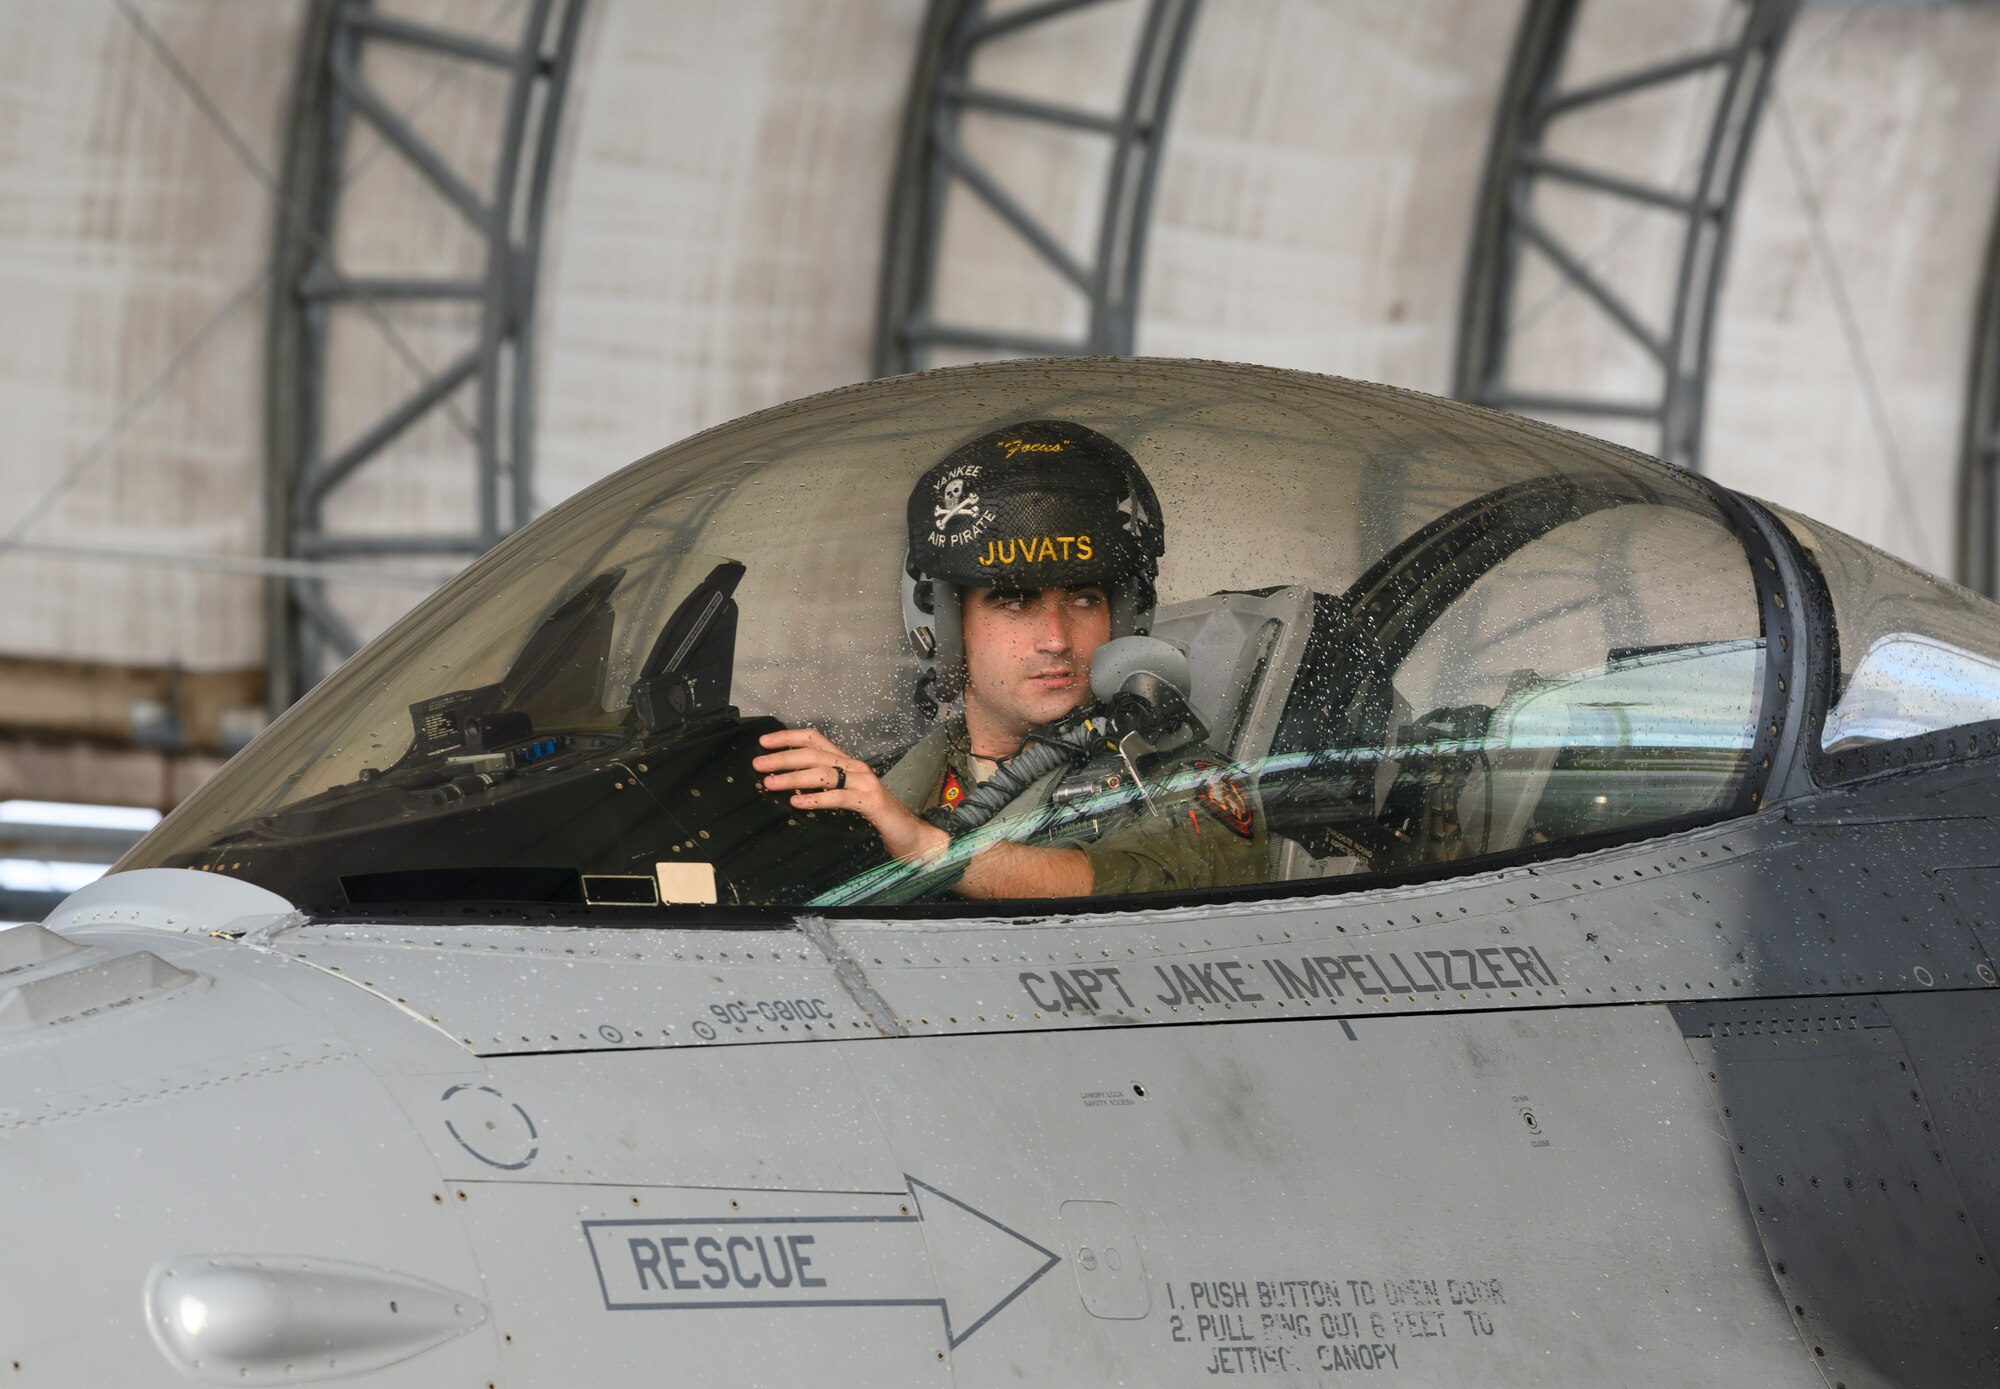 U.S. Air Force Capt. Mike Karnes, a 14th Fighter Squadron F-16 fighter pilot, parks an F-16 Fighting Falcon at Andersen Air Force Base, Guam, April 22, 2019. Misawa Air Base Airmen and aircraft deployed to Guam for Resilient Typhoon, an exercise designed to strengthen airpower dispersal capabilities within the Indo-Pacific region. (U.S. Air Force photo by Staff Sgt. Brittany A. Chase)